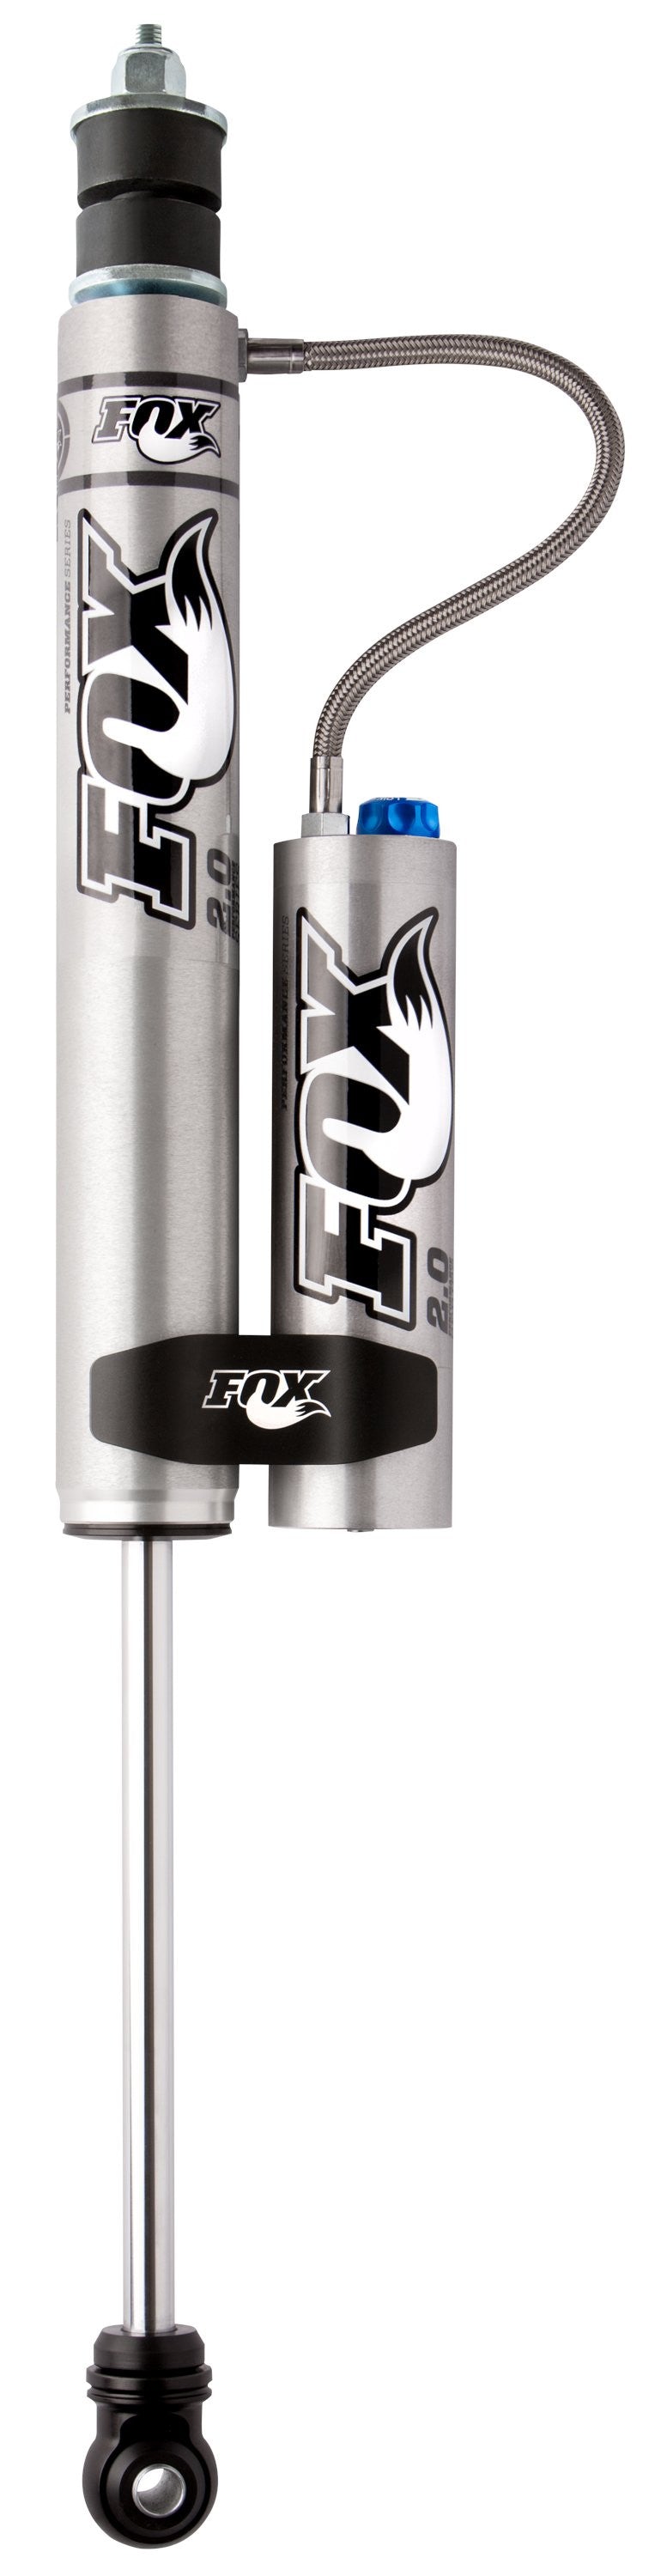 PERFORMANCE SERIES 2.0 SMOOTH BODY RESERVOIR SHOCK - ADJUSTABLE Lift: 0-1 1999-2016 Ford F-250 Super Duty FOX-985-26-104 - 2.0 SHOCK - FOX Offroad Shocks - Texas Complete Truck Center